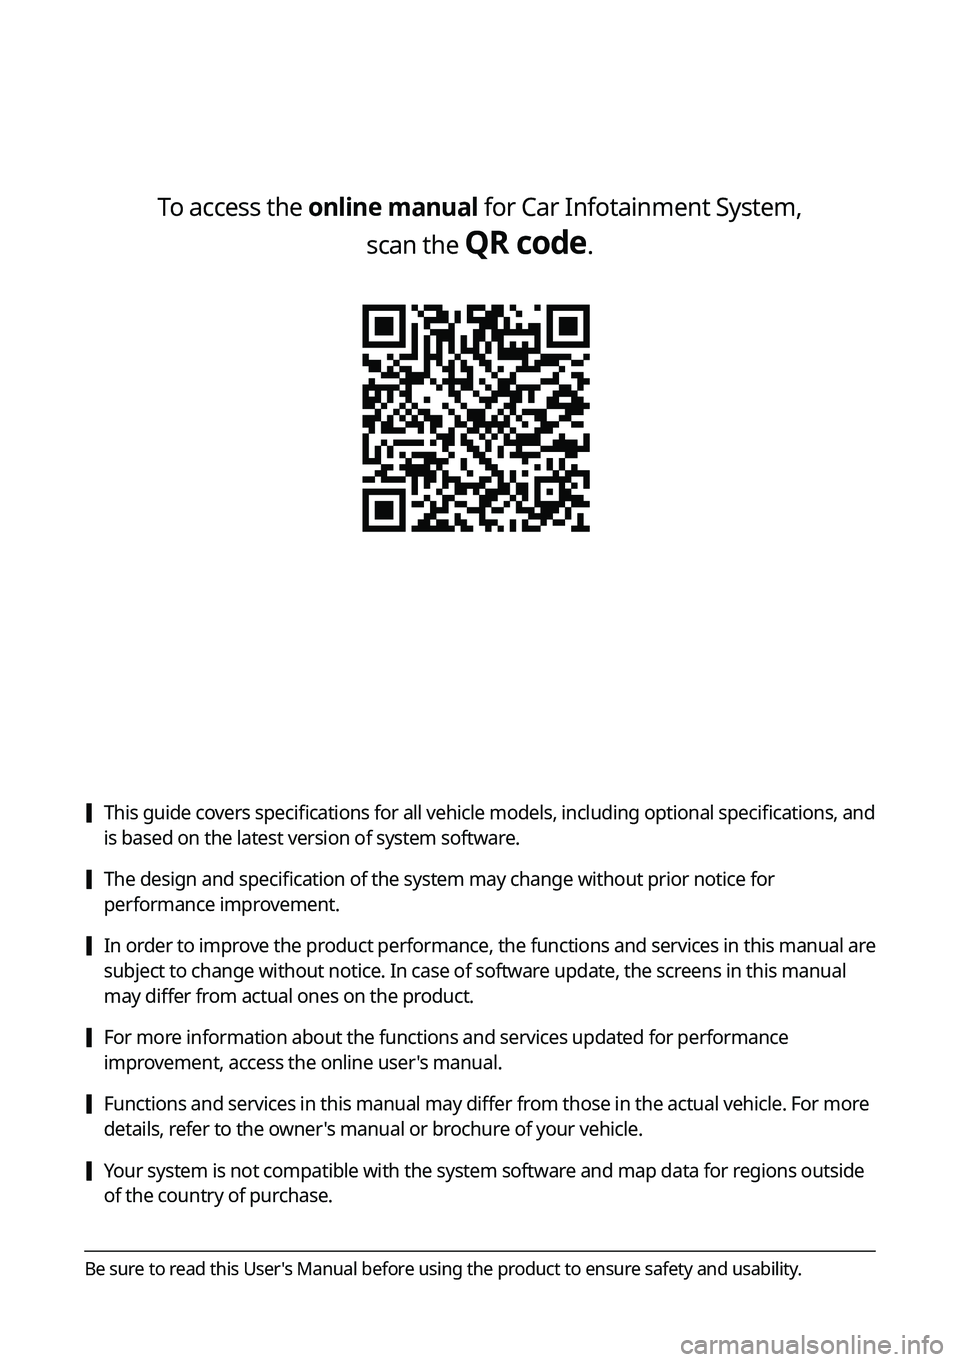 KIA SOUL 2023  Quick Reference Guide To access the online manual for Car Infotainment System,  scan the 
QR code.
 [This guide covers specifications for all vehicle models, including optional specifications, and 
is based on the latest v